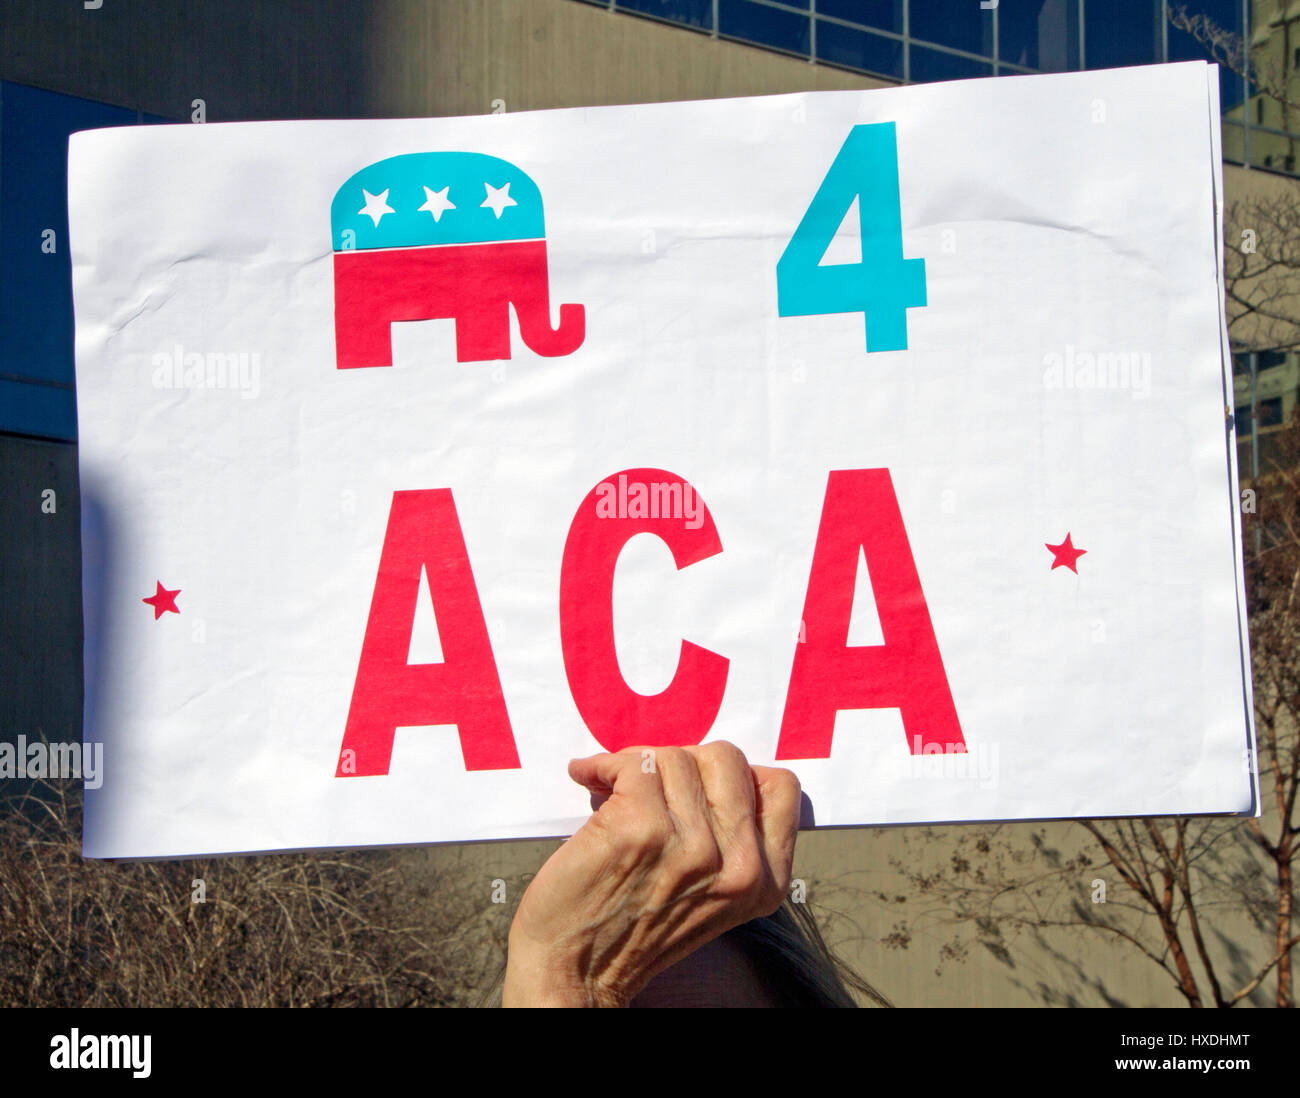 Asheville, North Carolina, USA - February 25, 2017: Close up of a hand holding a colorful sign at an Obamacare rally that shows the GOP (a Republican) Stock Photo